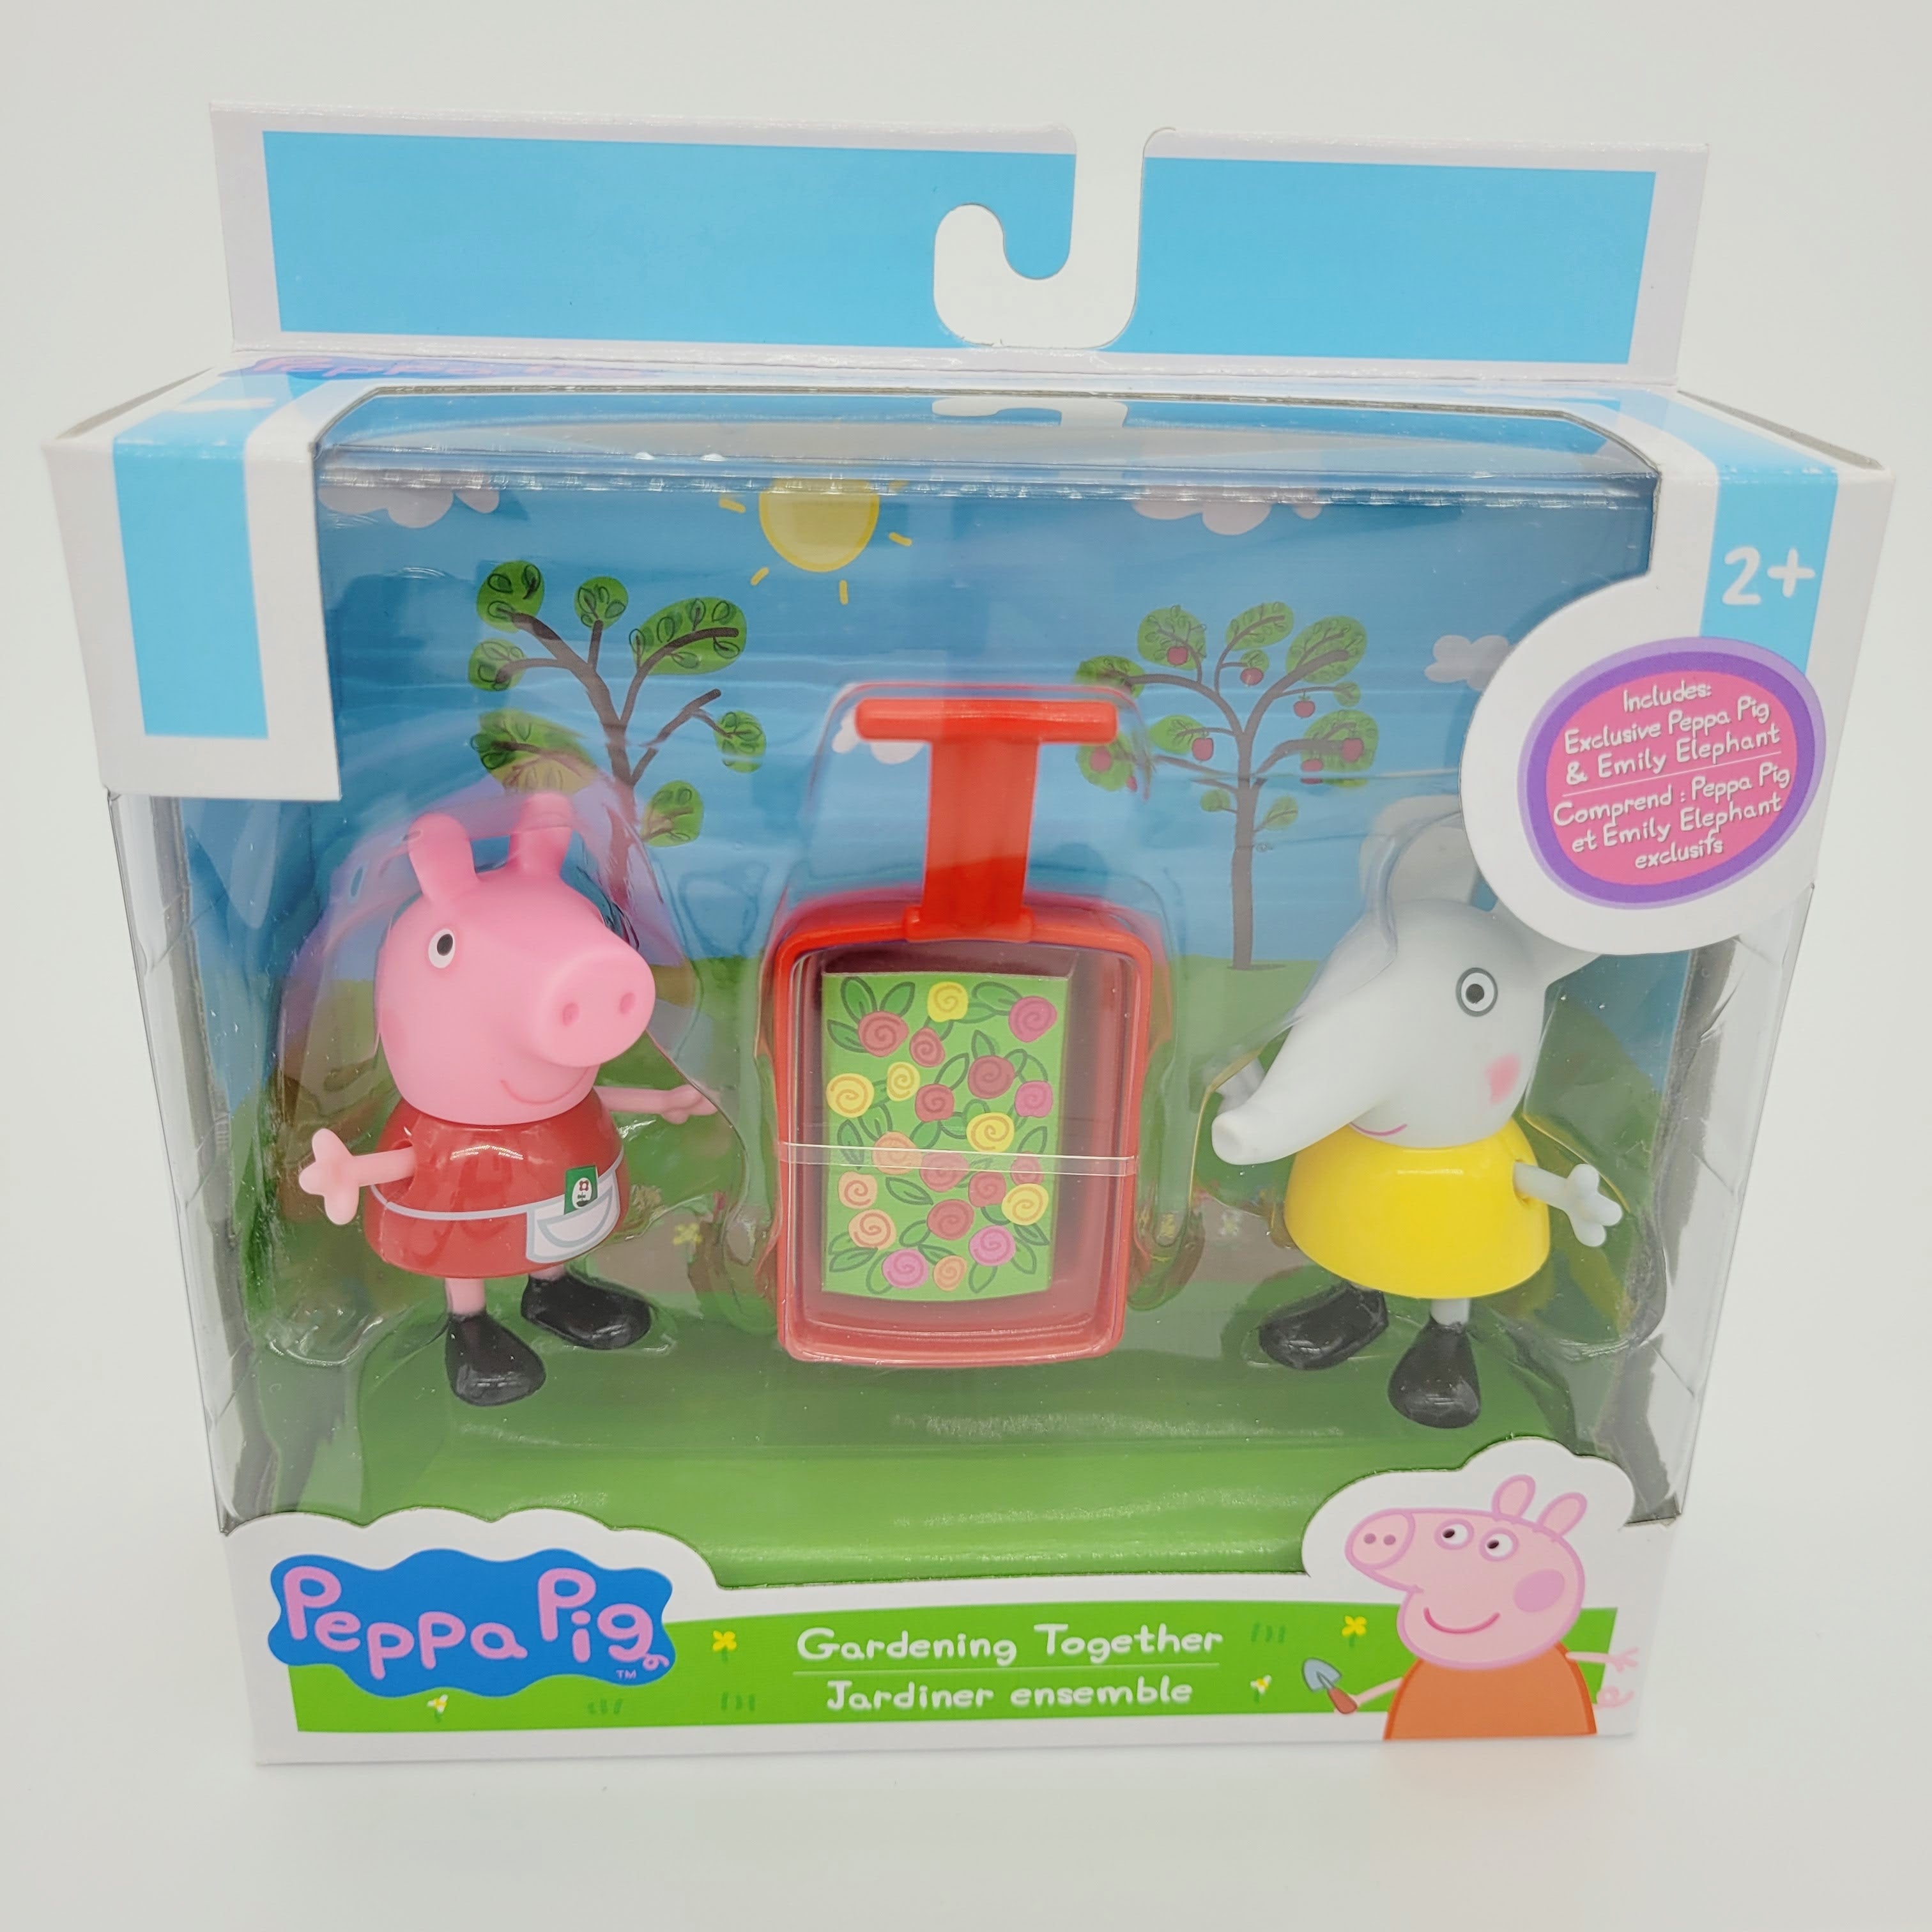 Official Peppa Pig Gardening Together Playset by Jazwares with